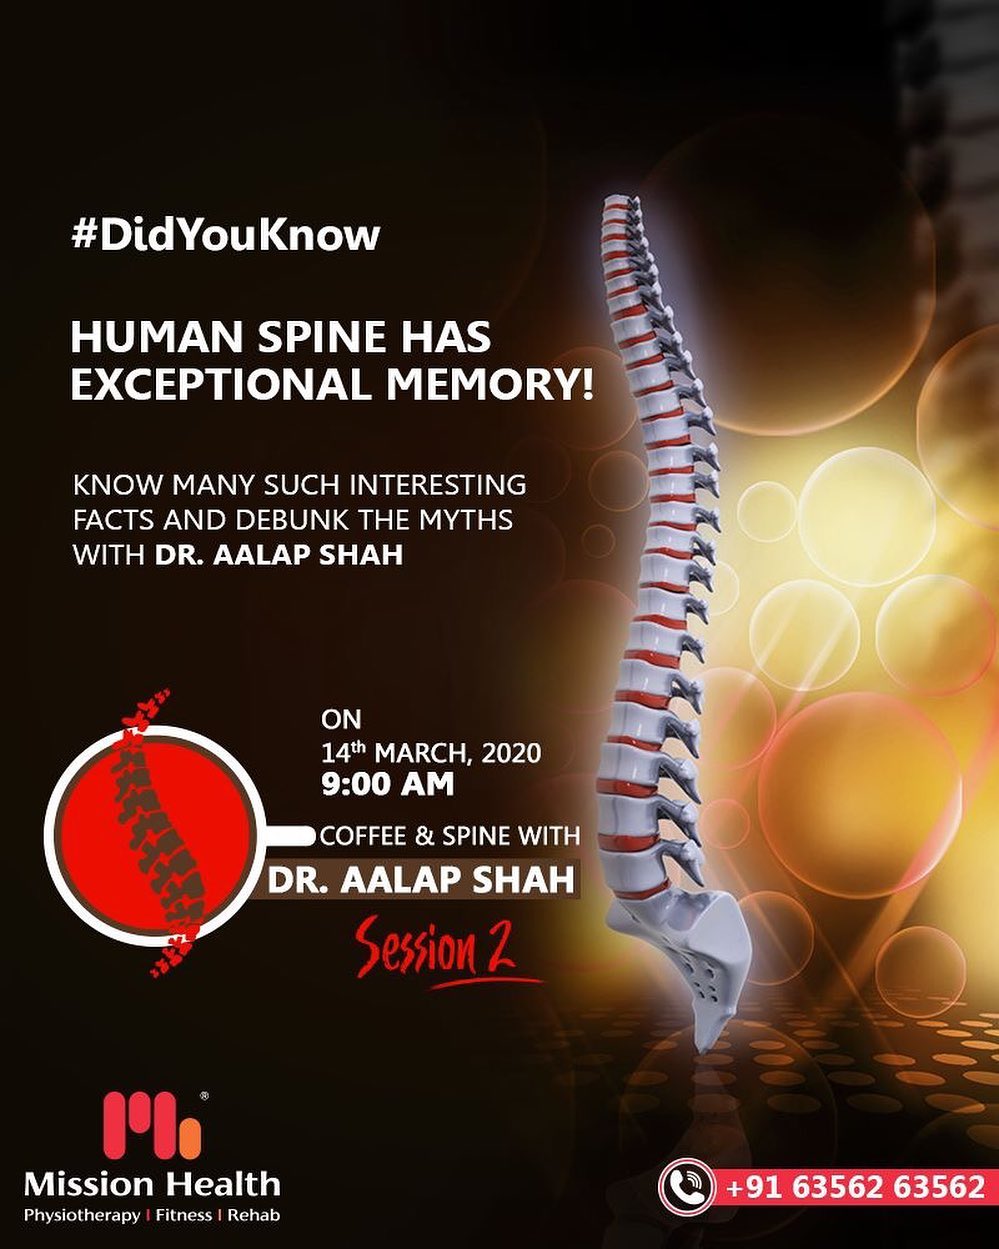 Coffee & Spine with Dr. Alap Shah is back again with Session 2 to debunk all your spine myths this Saturday.

For more details, keep reading this space... Call: +916356263562
Visit: www.missionhealth.co.in

#CoffeeAndSpineWithDrAalapShah #DrAalapShah #SuperSpecialitySpineClinic #SpineClinic #BackPain #NeckPain #SlippedDisc #MissionHealth #MissionHealthIndia #AbilityClinic #MovementIsLife